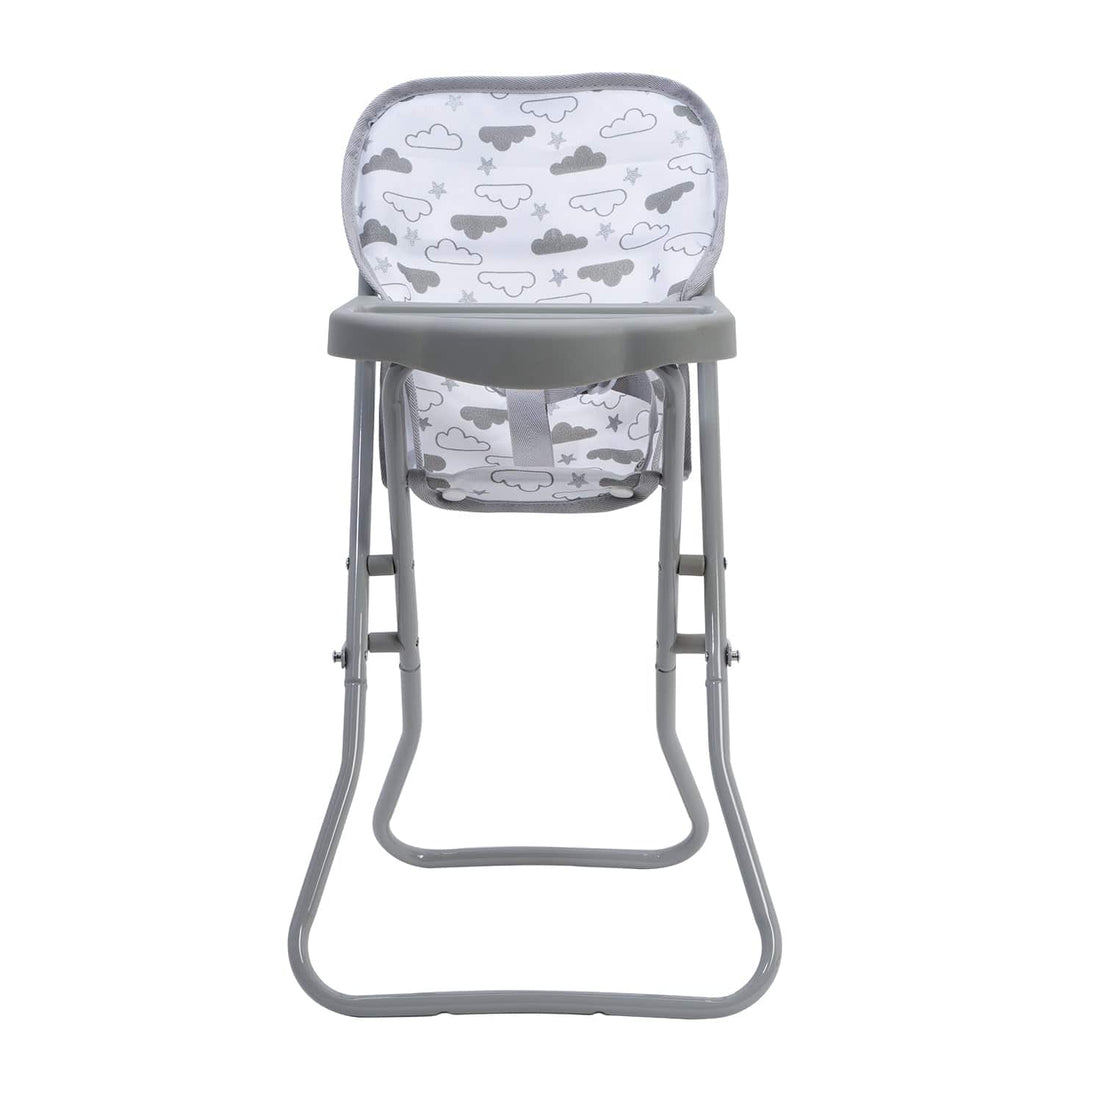 Adora Baby Doll Accessories - High Chair - Twinkle Stars Print